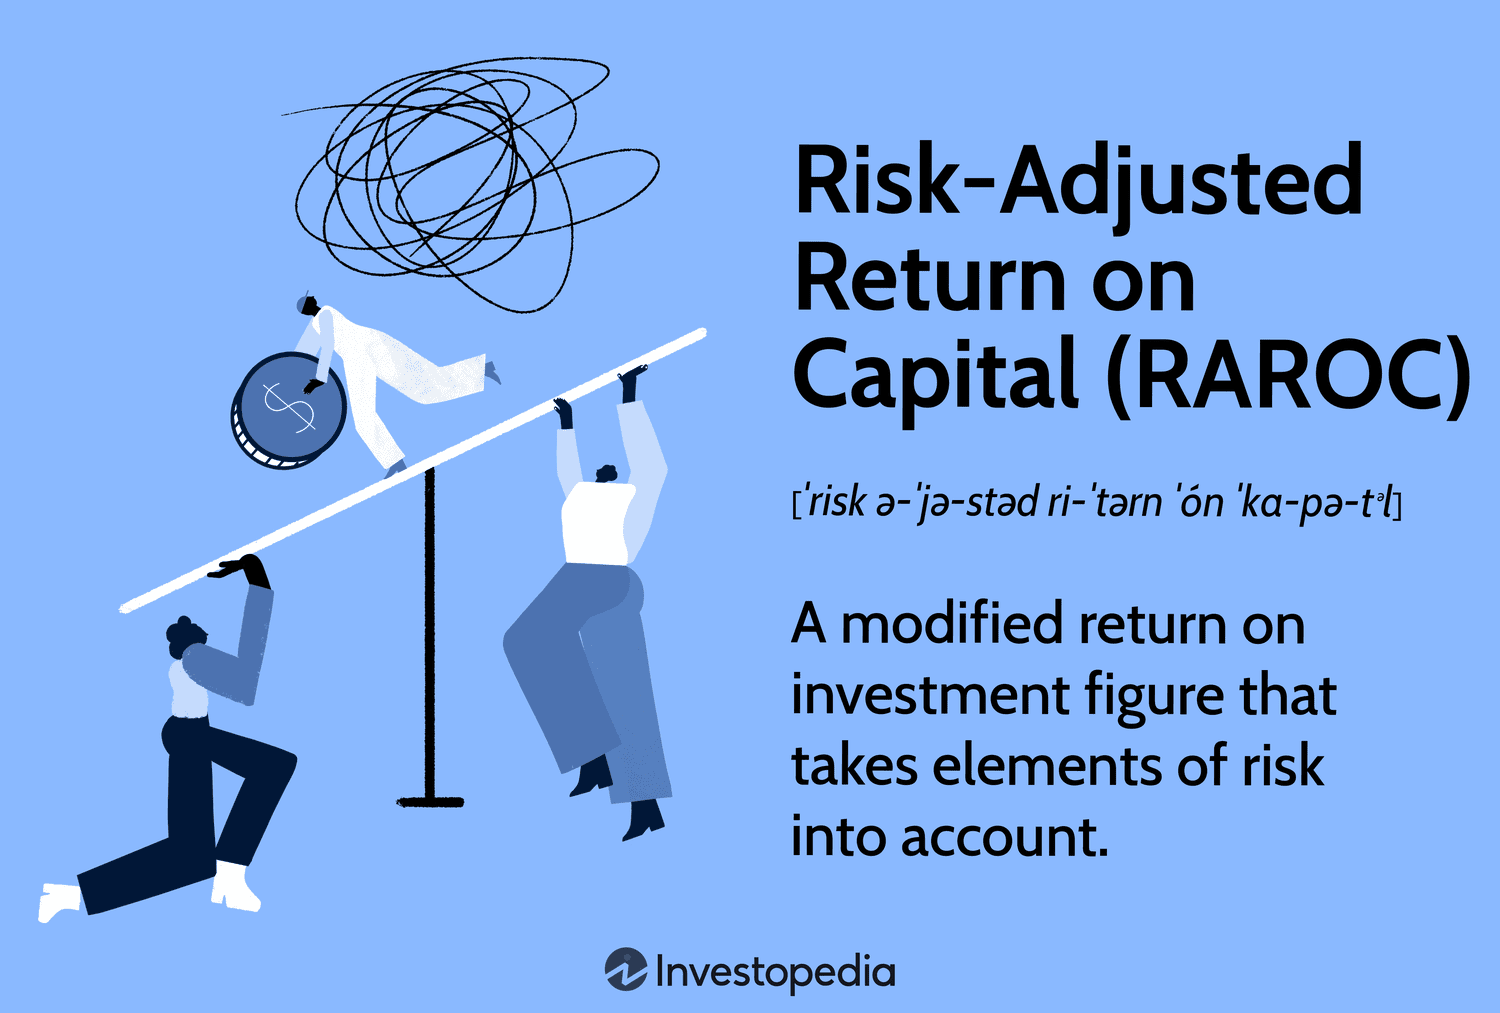 Risk-Adjusted Return on Capital (RAROC): A modified return on investment figure that takes elements of risk into account.